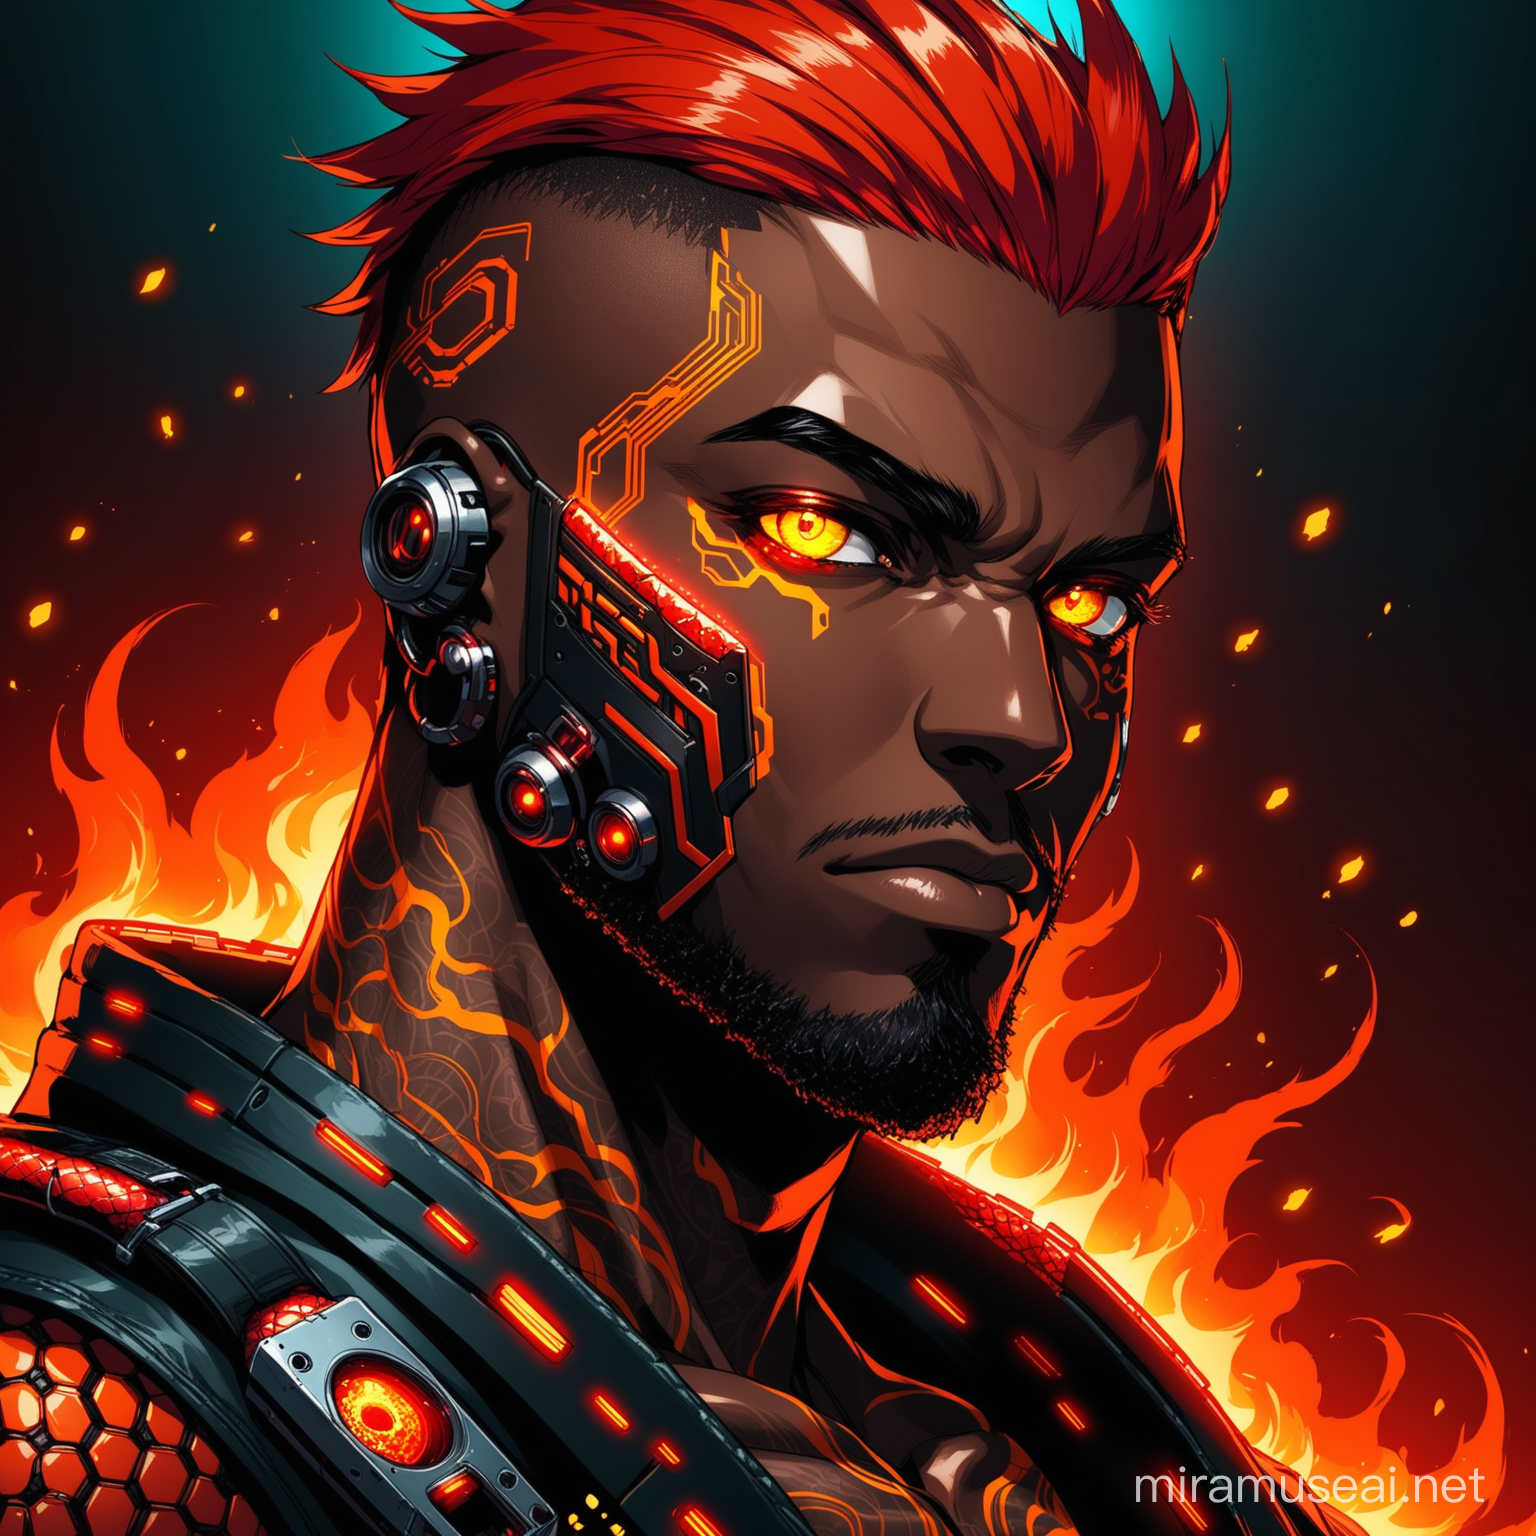 Prompt
Create a close-up portrait of a strong, handsome dark-skinned man with fiery red hair and piercing red snake eyes. He wears Cyberpunk attire. Ensure precise detail in depicting his eyes.  Dark background